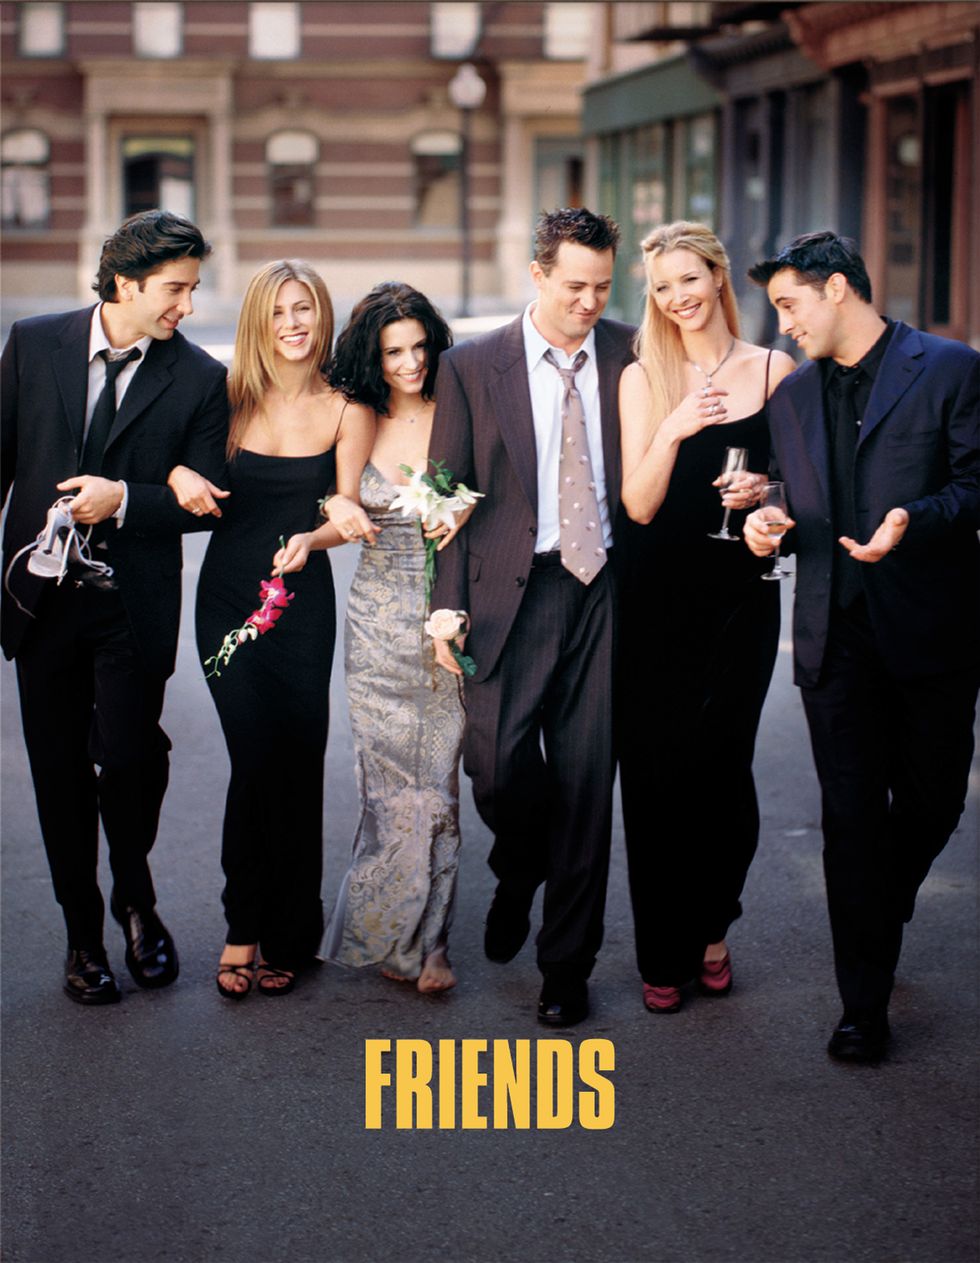 cast members of nbc's comedy series friends pictured l to r  david schwimmer as ross